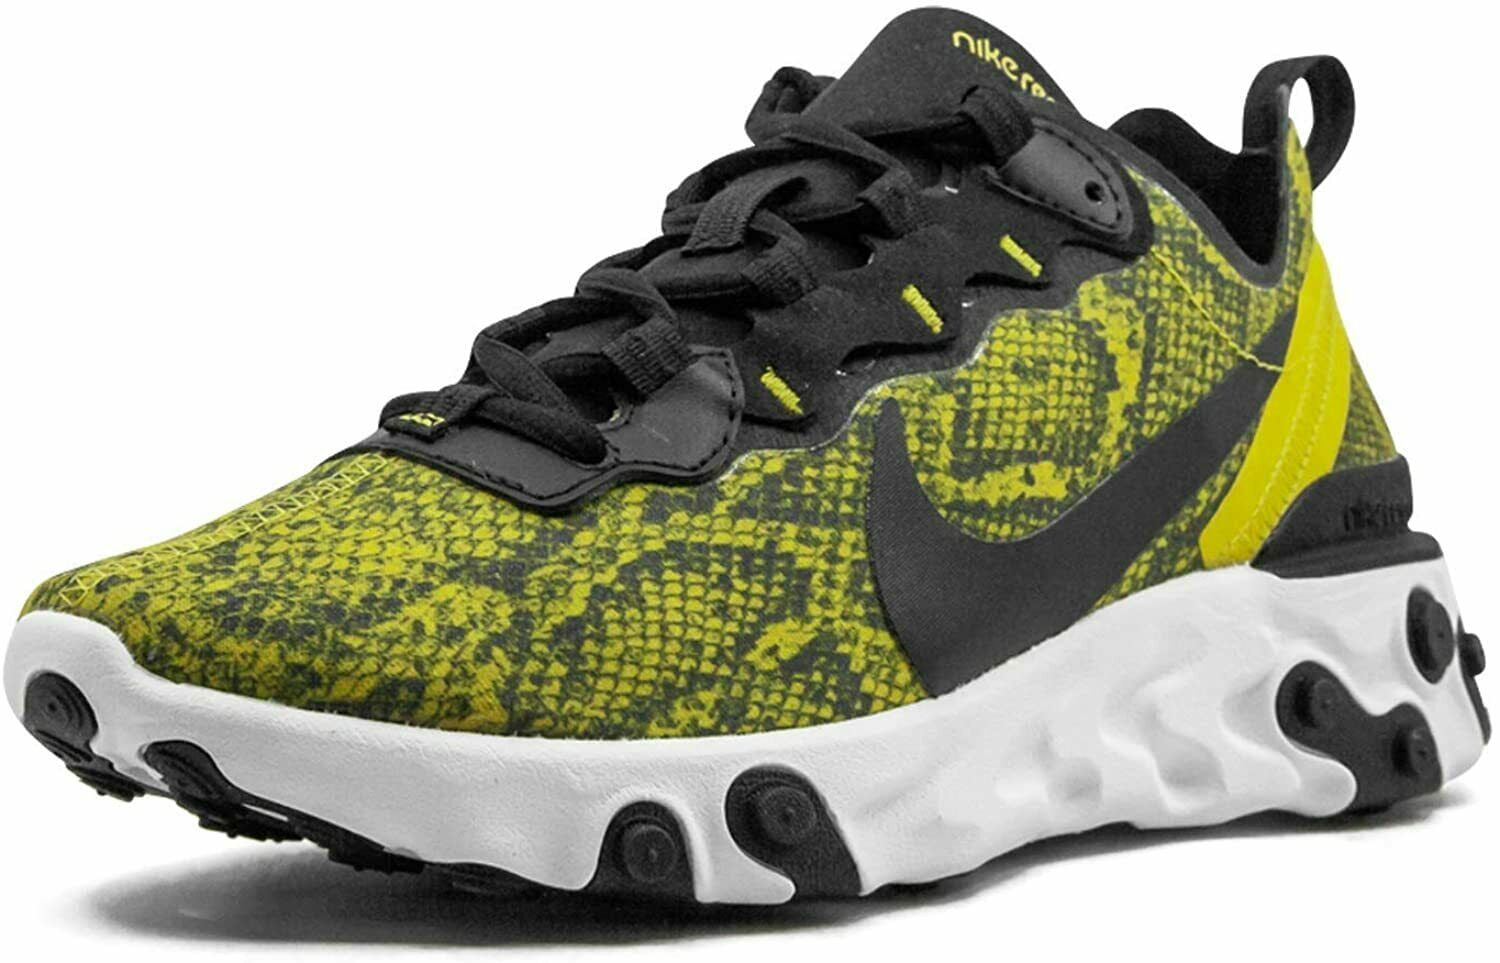 React Element 55 Women's Shoes CT1551 700 Size 6.5 New in box -